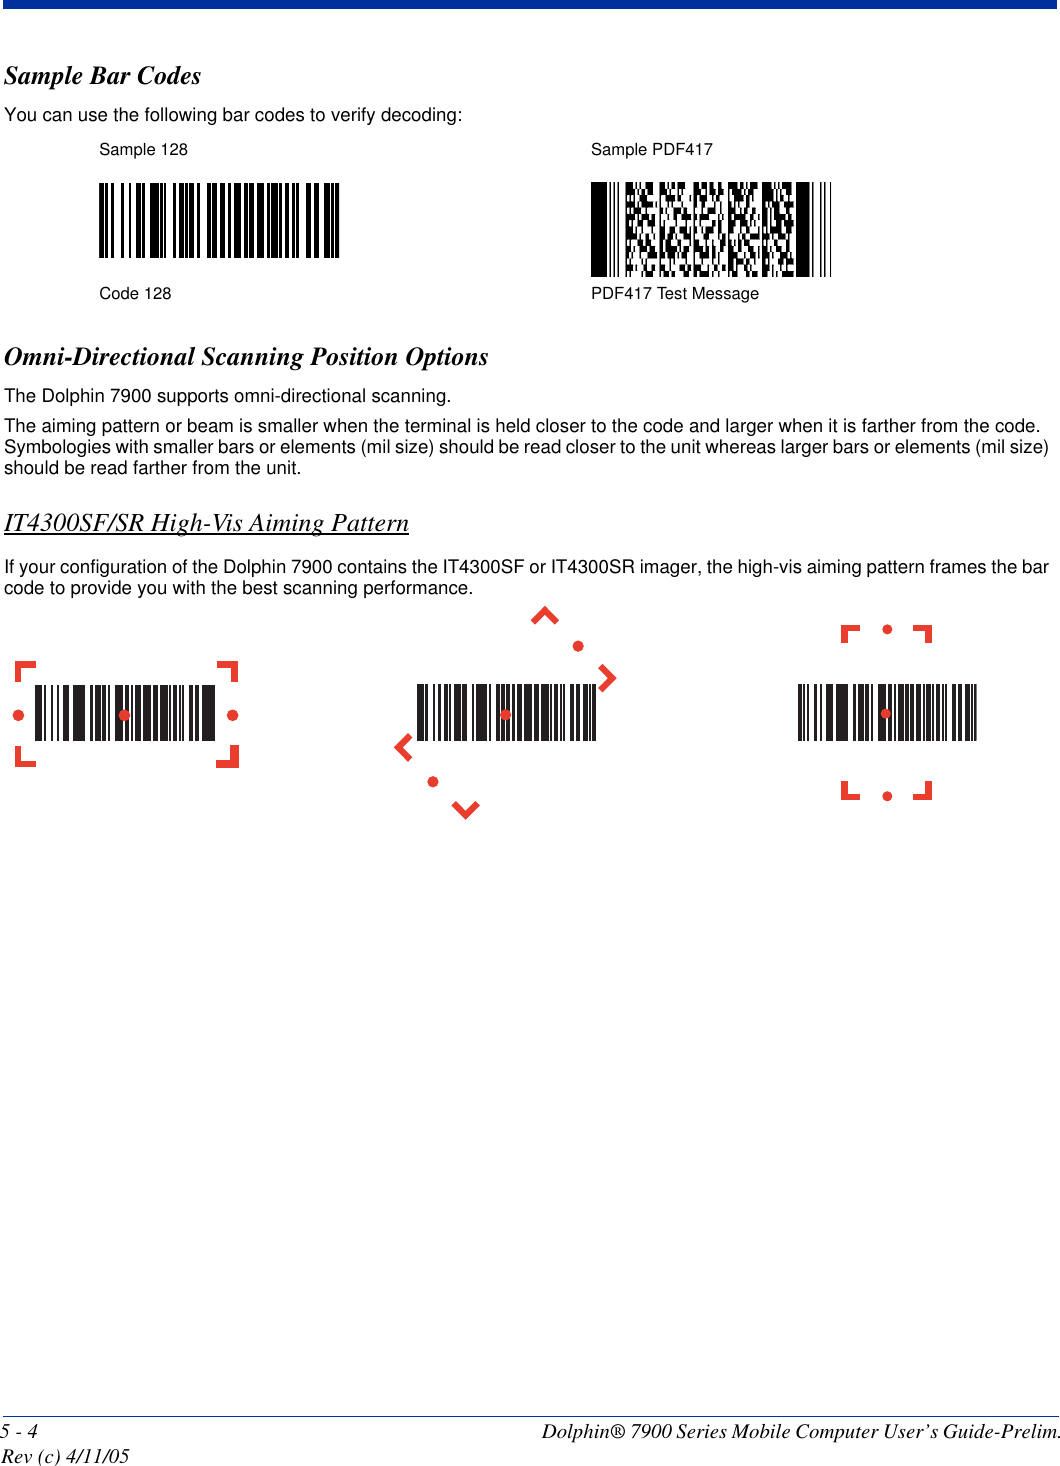 5 - 4 Dolphin® 7900 Series Mobile Computer User’s Guide-Prelim. Rev (c) 4/11/05Sample Bar CodesYou can use the following bar codes to verify decoding:Omni-Directional Scanning Position OptionsThe Dolphin 7900 supports omni-directional scanning. The aiming pattern or beam is smaller when the terminal is held closer to the code and larger when it is farther from the code. Symbologies with smaller bars or elements (mil size) should be read closer to the unit whereas larger bars or elements (mil size) should be read farther from the unit. IT4300SF/SR High-Vis Aiming PatternIf your configuration of the Dolphin 7900 contains the IT4300SF or IT4300SR imager, the high-vis aiming pattern frames the bar code to provide you with the best scanning performance. Sample 128 Sample PDF417Code 128 PDF417 Test Message